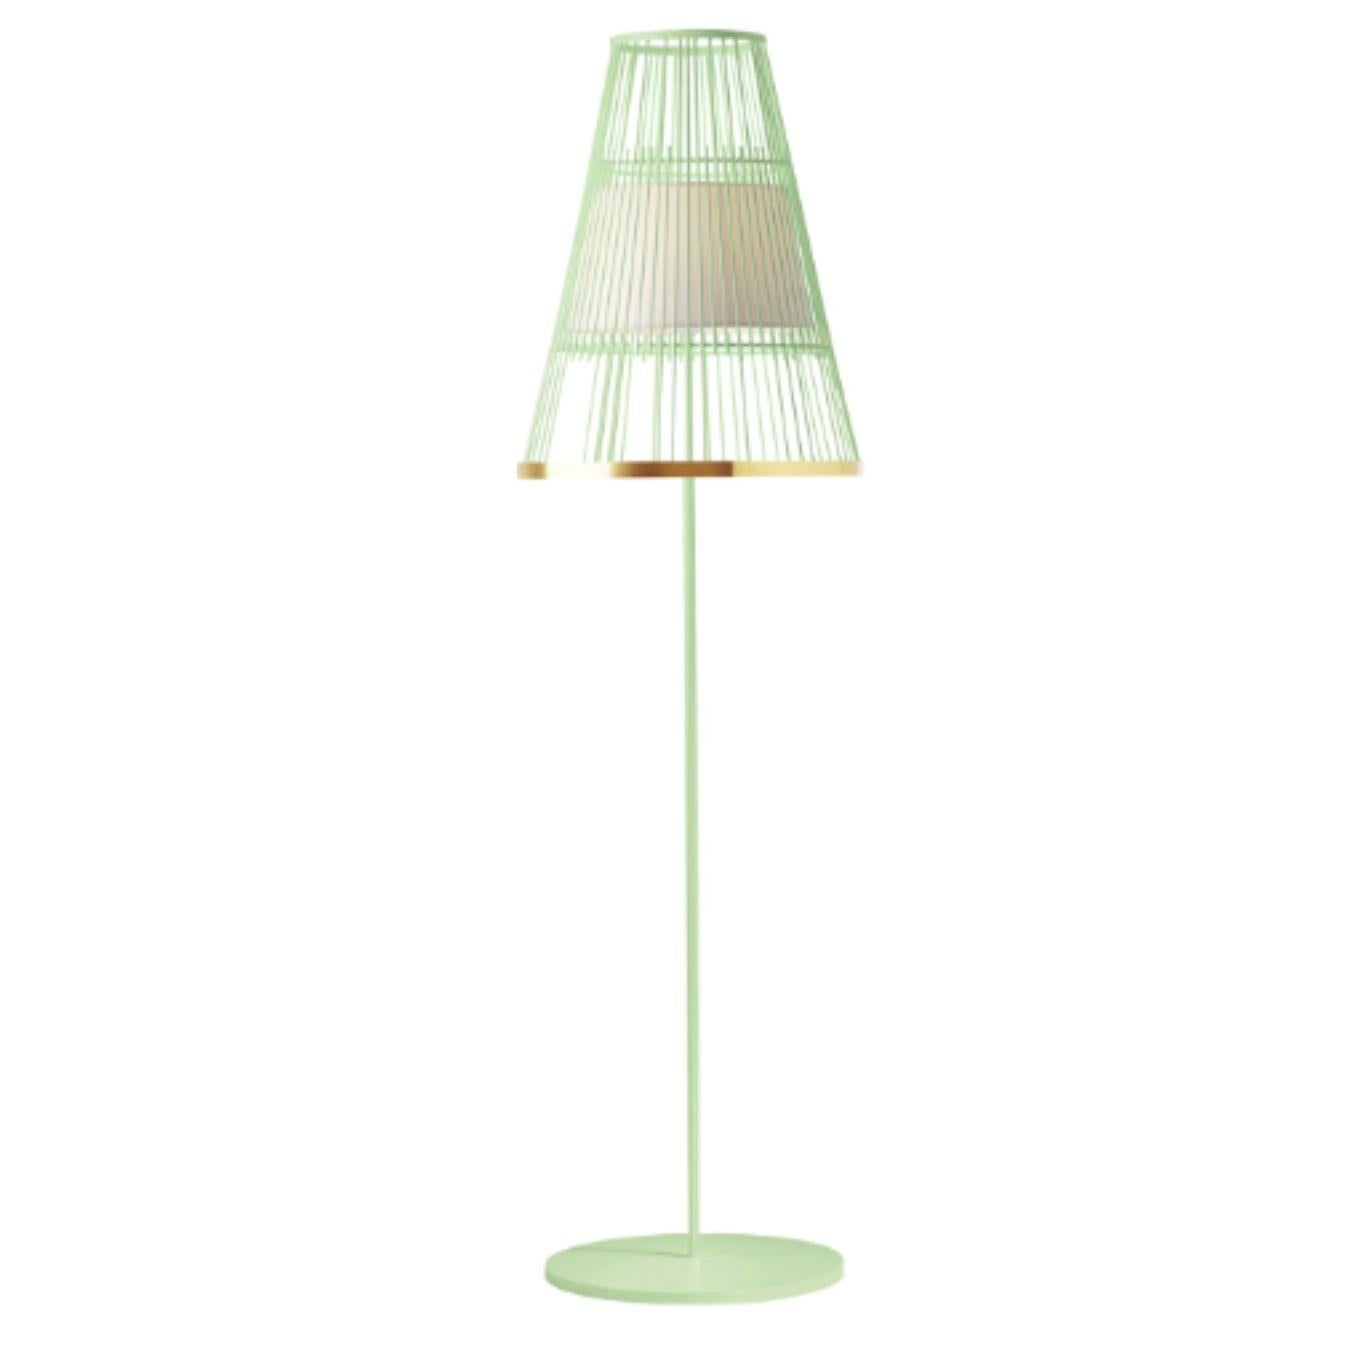 Dream up floor lamp with brass ring by Dooq.
Dimensions: W 47 x D 47 x H 170 cm
Materials: lacquered metal, polished or brushed metal, brass.
Abat-jour: cotton
Also available in different colors and materials.

Information:
230V/50Hz
E27/1x20W